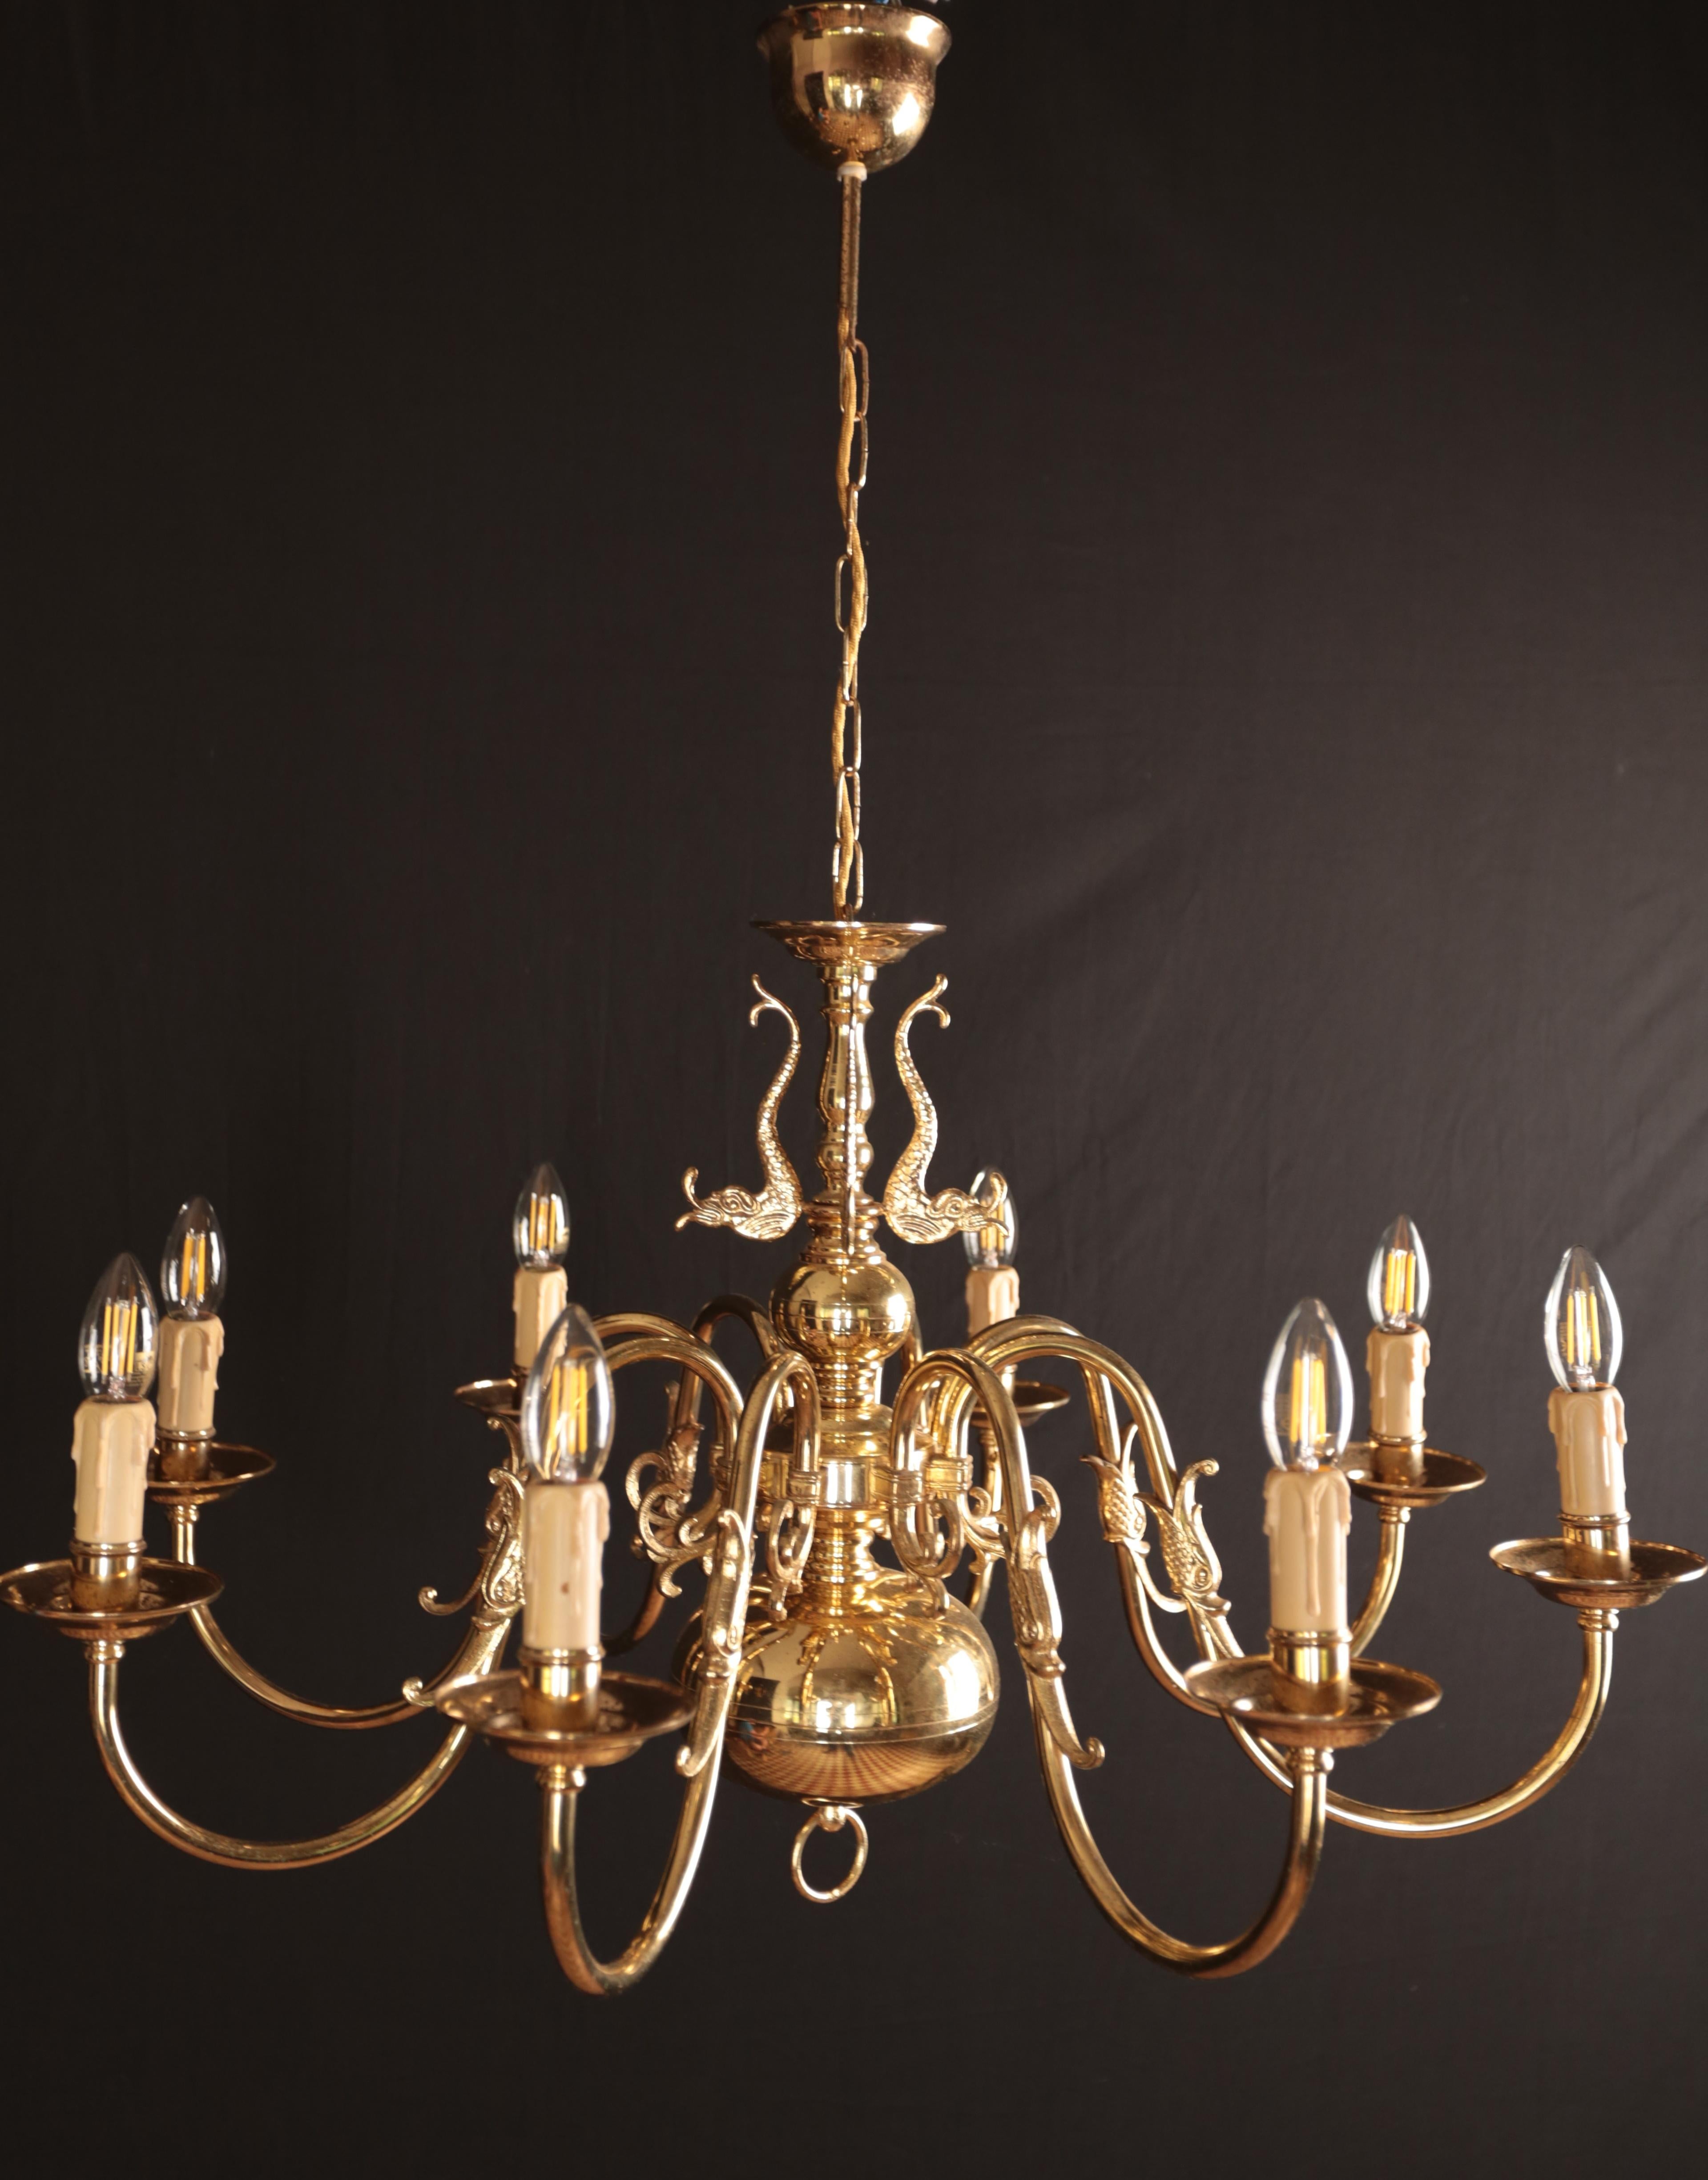 Baroque Revival Eight-armed Flemish chandelier. Functional For Sale